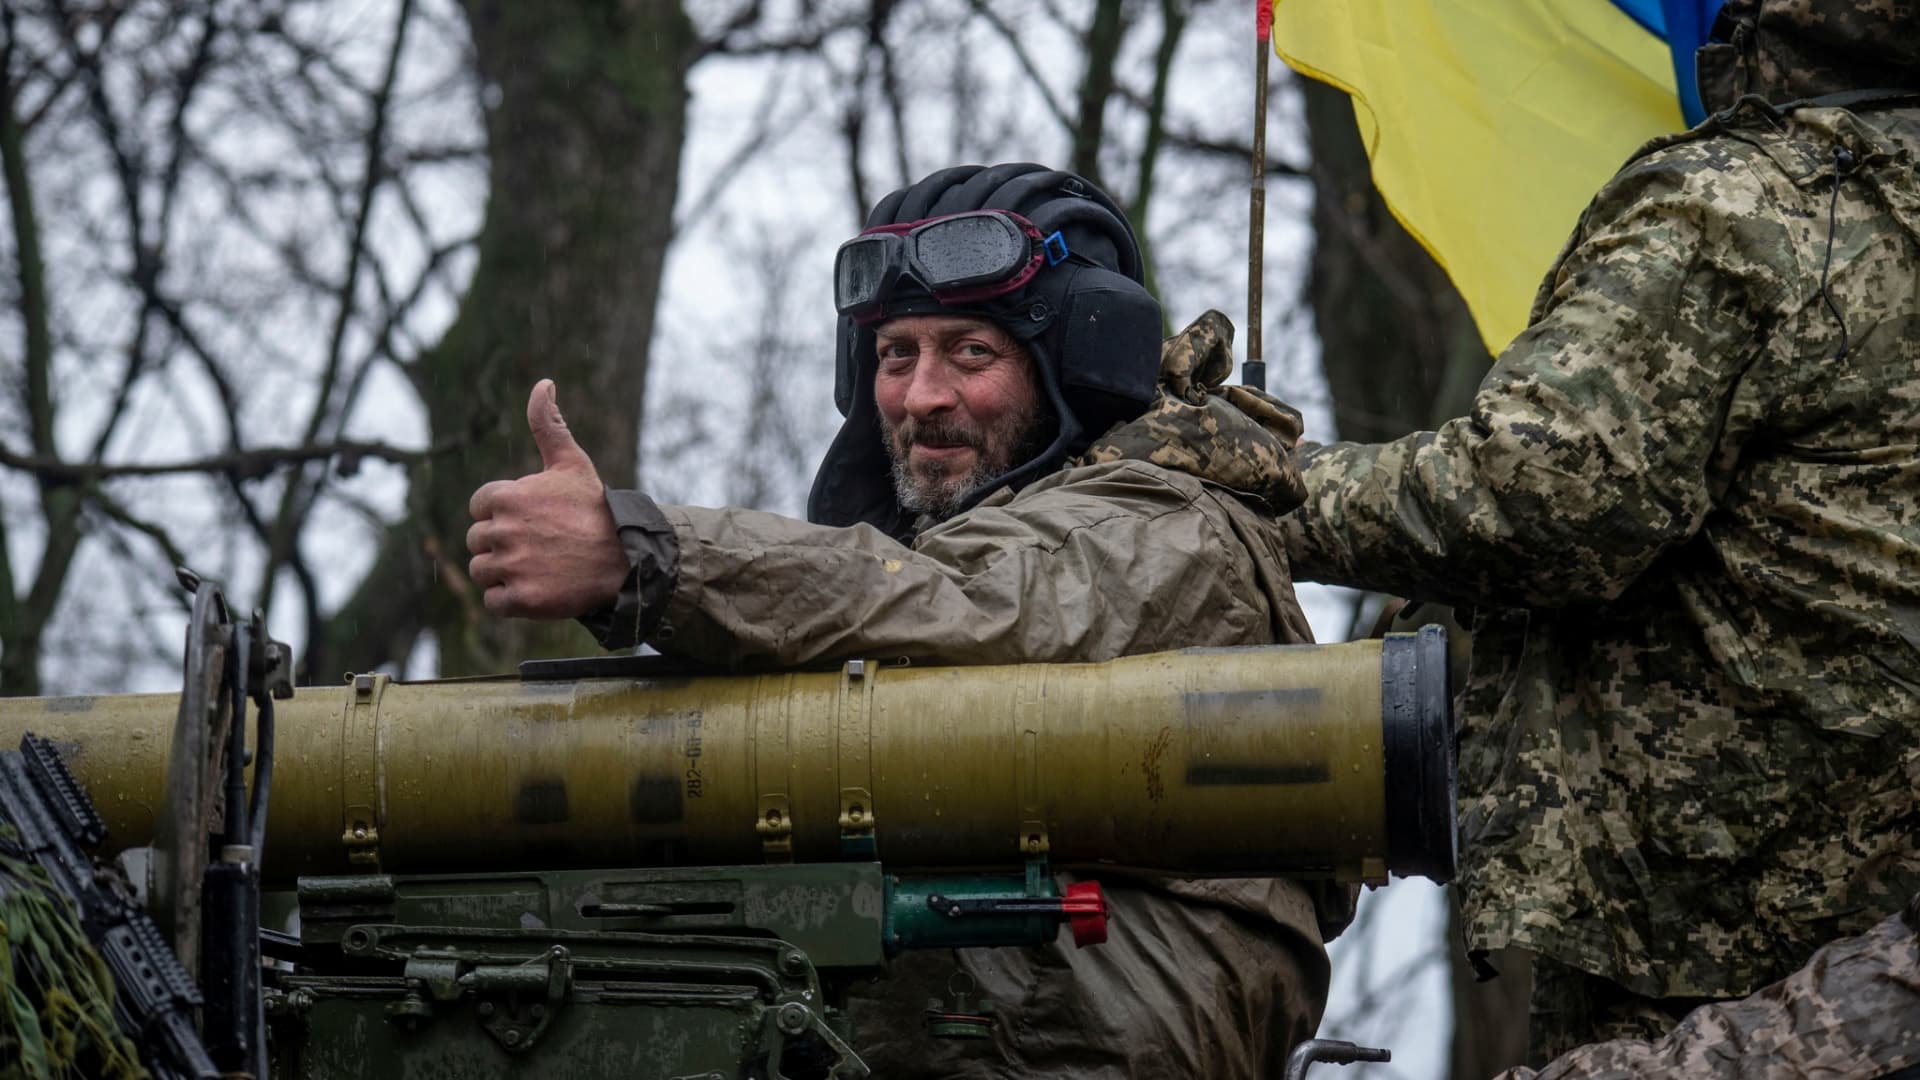 A Ukrainian serviceman rides atop an armored fighting vehicle, as Russia?s attack on Ukraine continues, at an unknown location in Eastern Ukraine, in this handout picture released April 19, 2022.